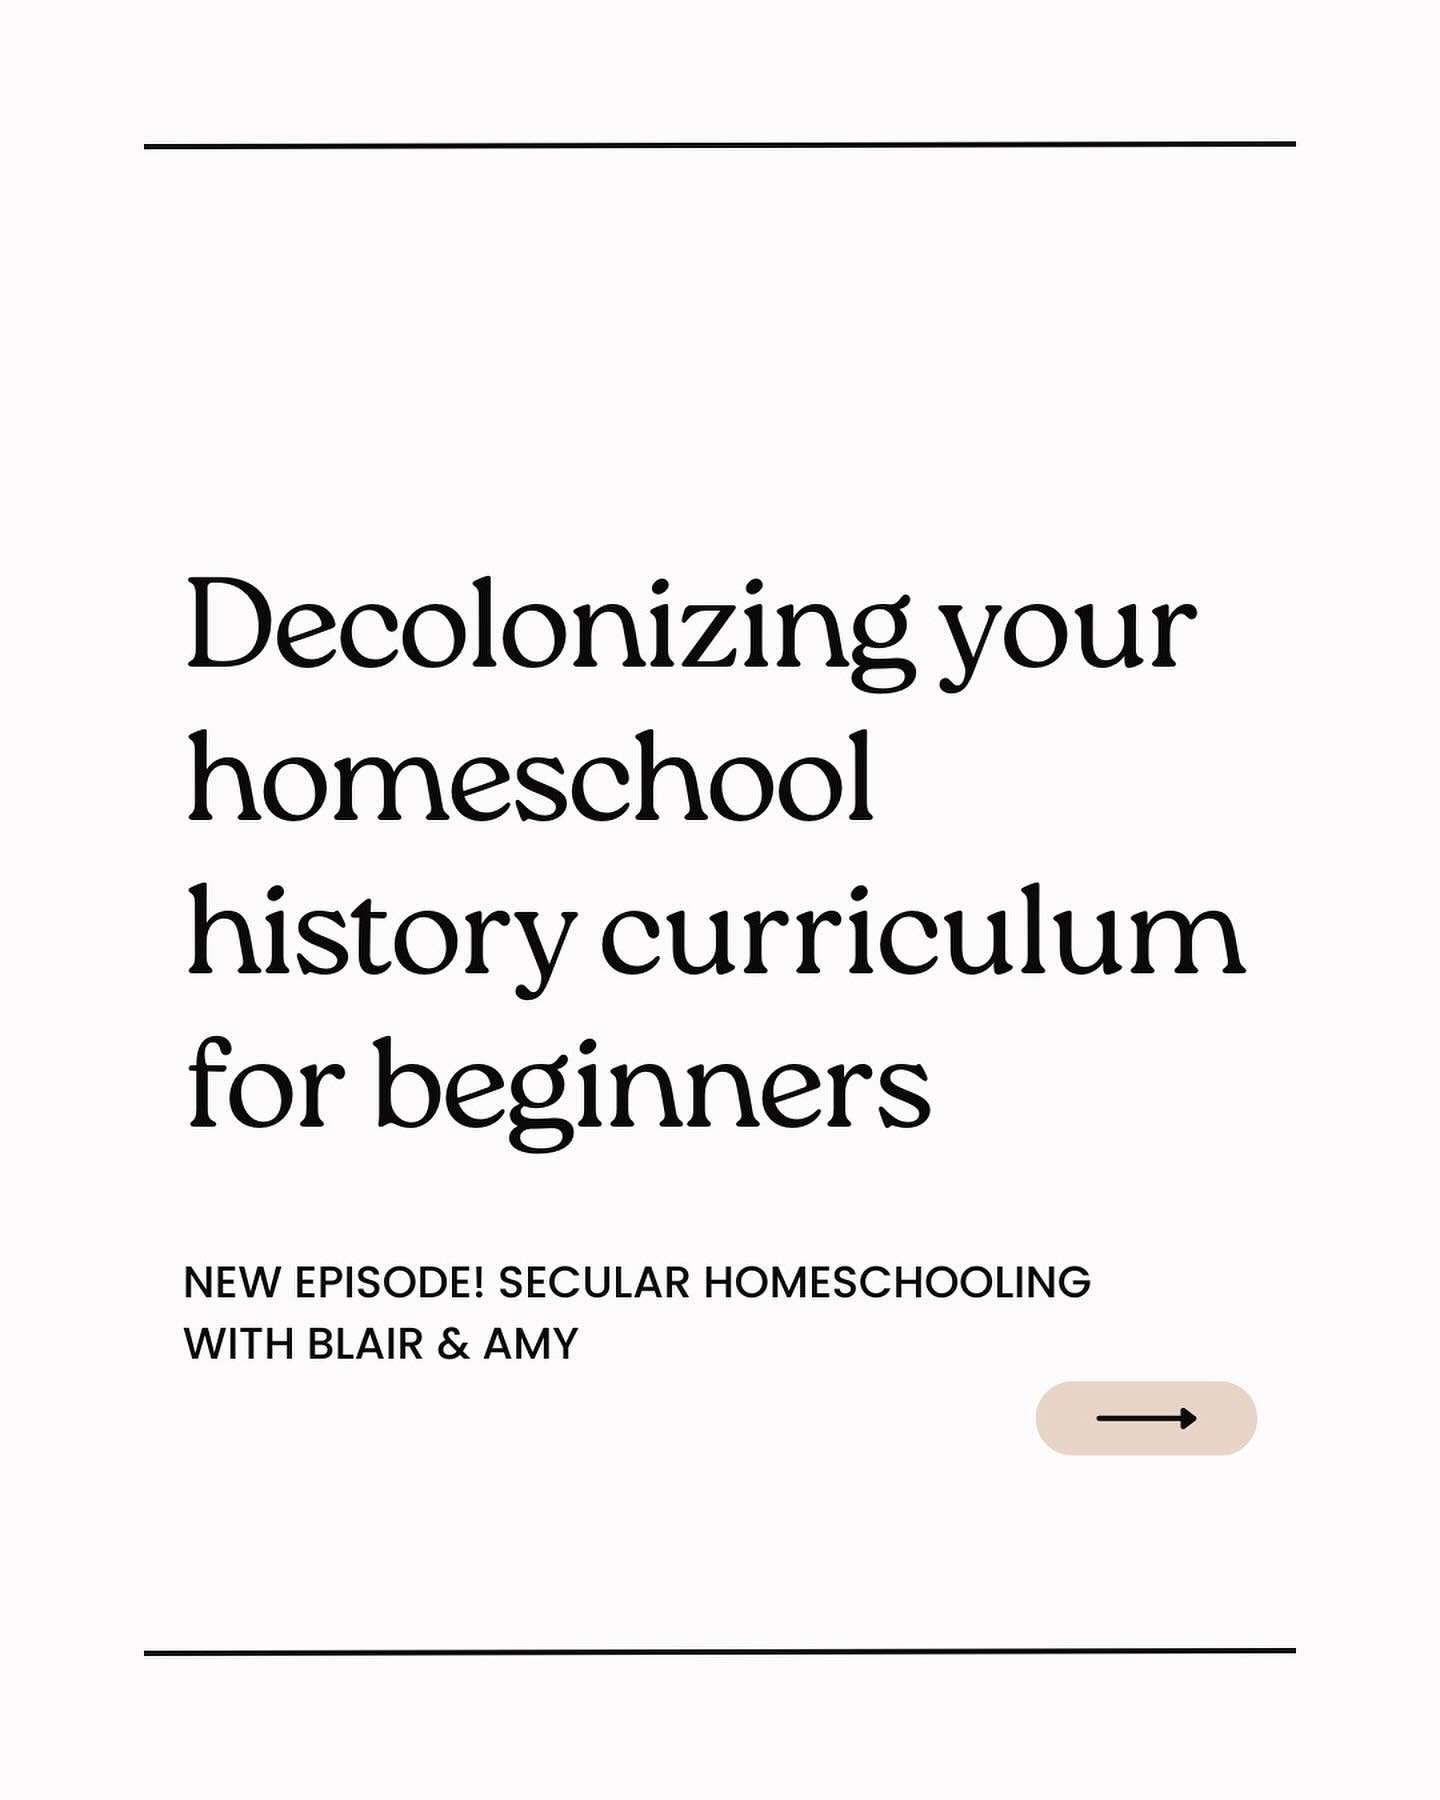 Please, please, please stop shopping for a perfect secular, intersectional, decolonized history curriculum and start focusing on what you can do to make your homeschool more intersectional and decolonized.

Maybe one day &ldquo;decolonized&rdquo; wil